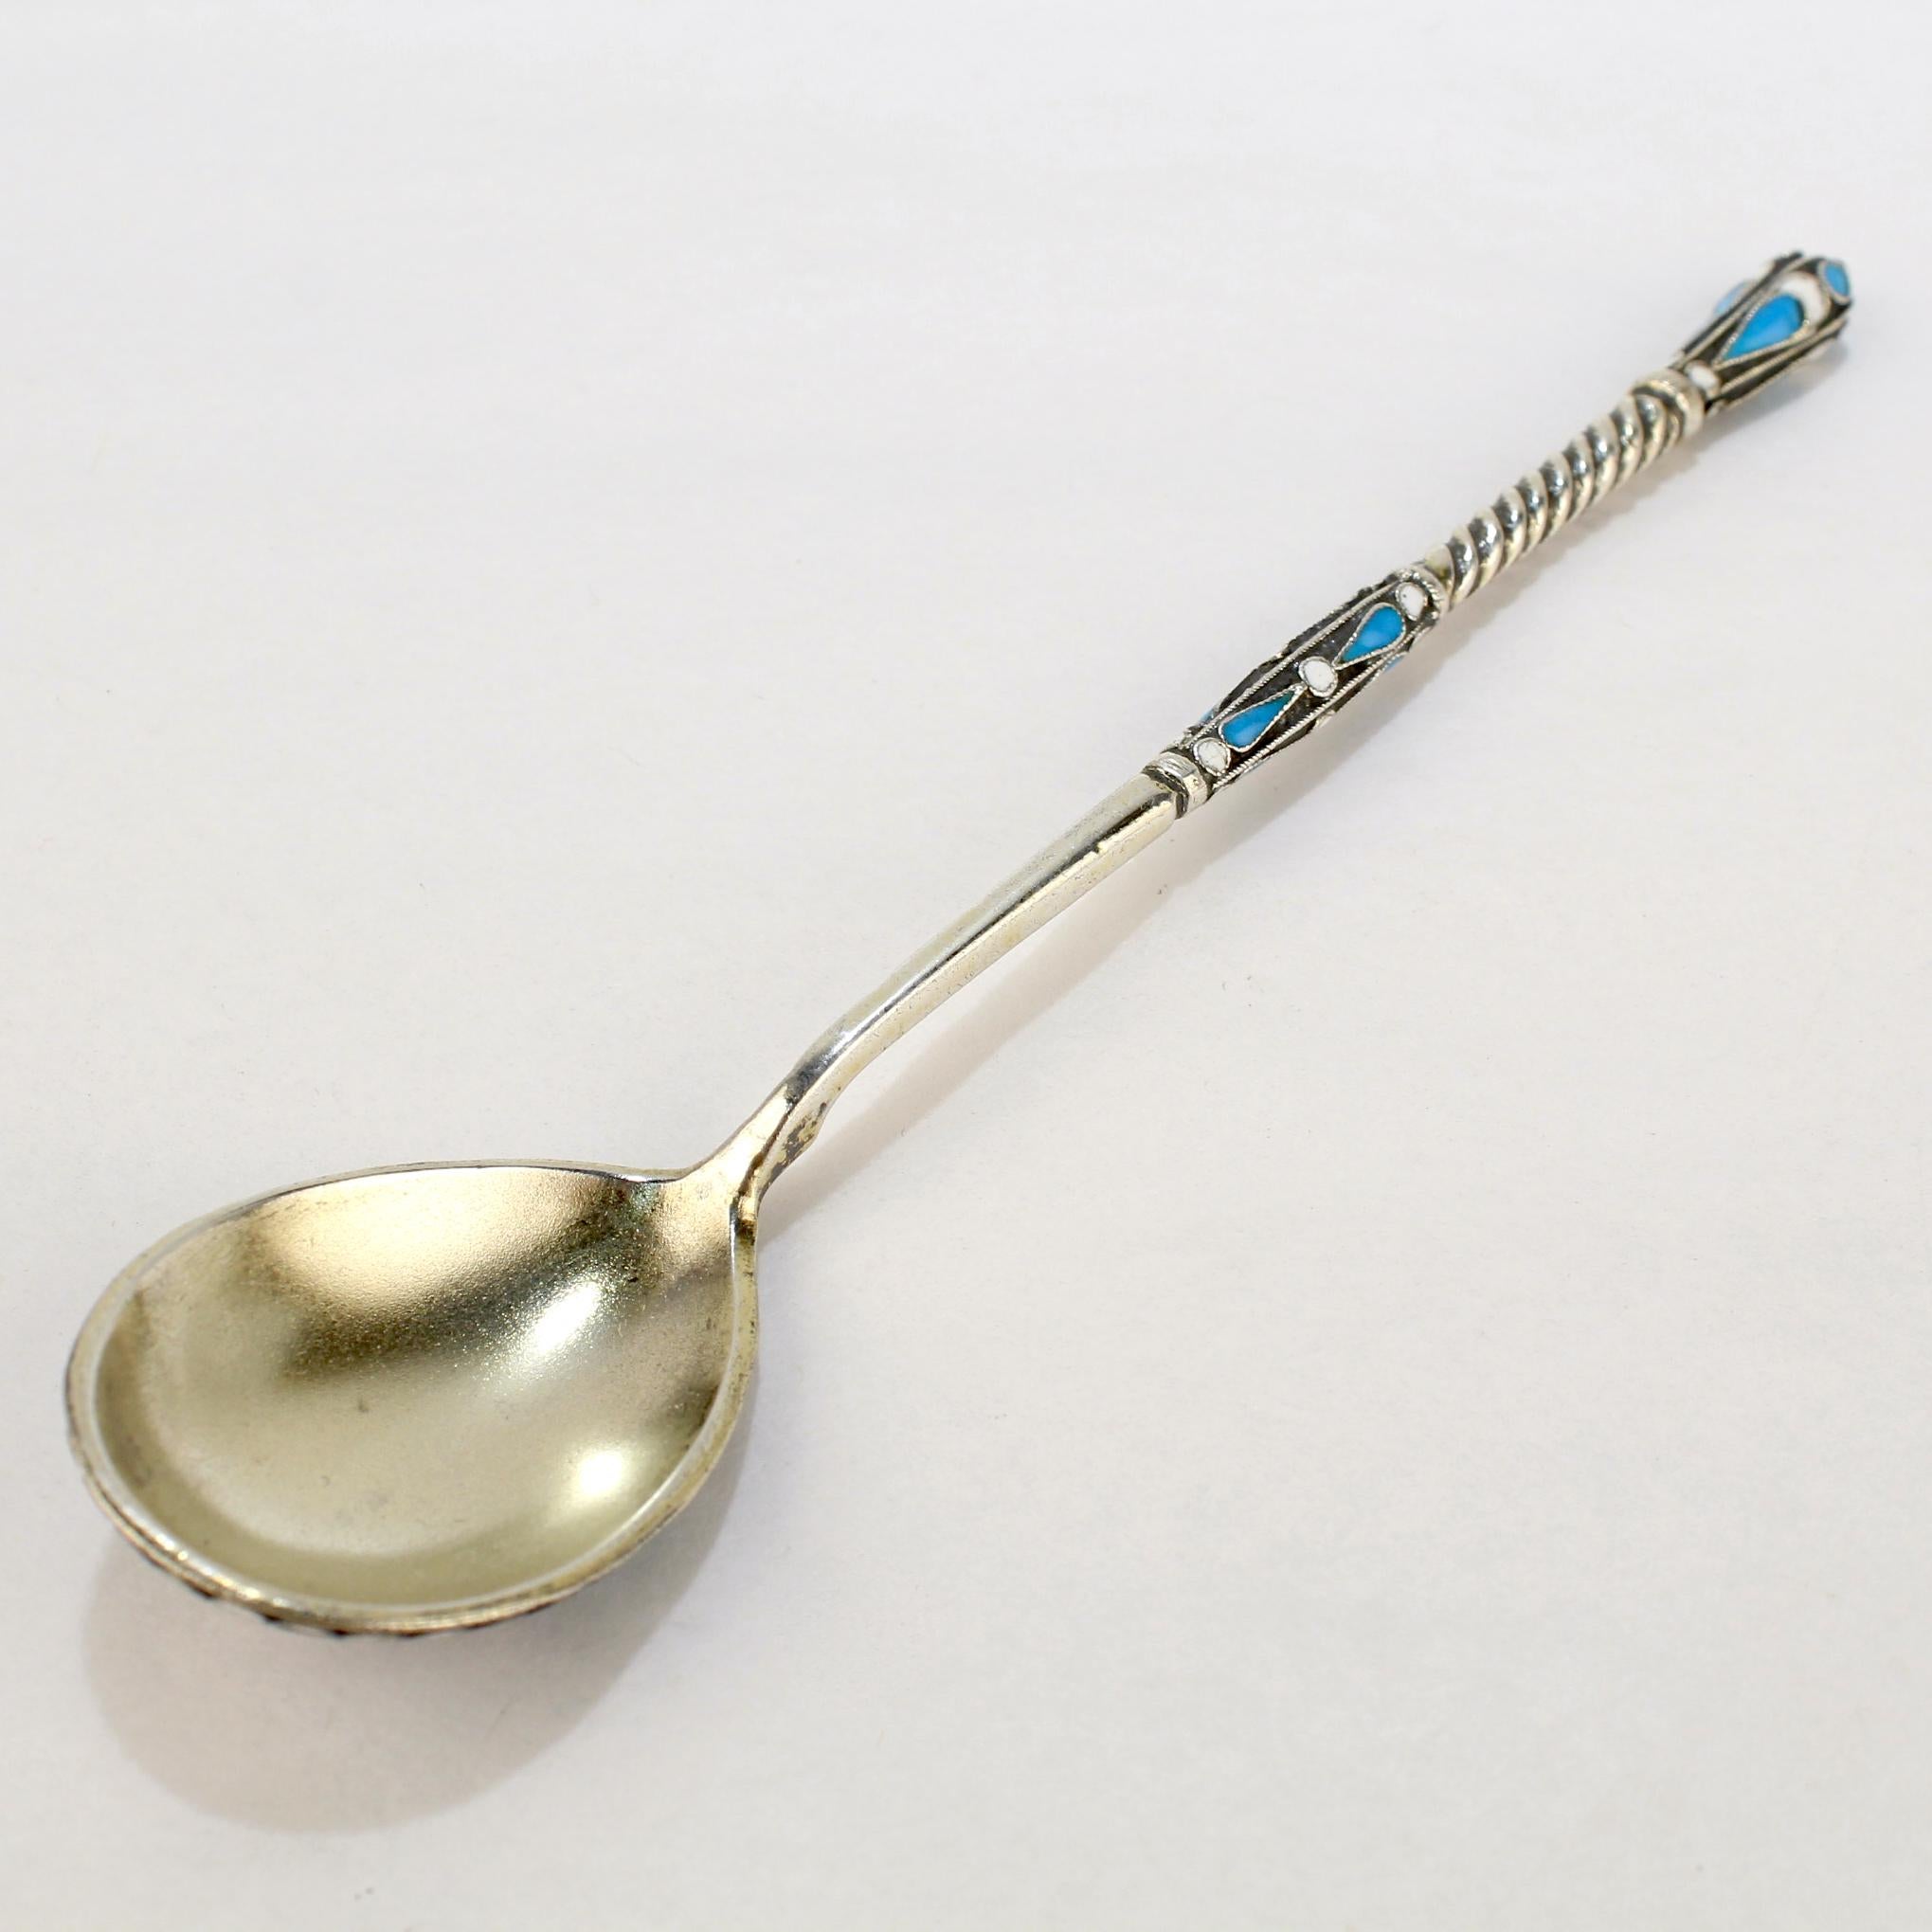 A fine Russian gilt silver & cloisonné enamel spoon.

By Gustav Klingert of Moscow Russia.

With a twisted handle and an enamel terminal.

The bowl is richly decorated with enameled cloisons. 

Simply a wonderful Imperial Russian spoon!

Date:
circa